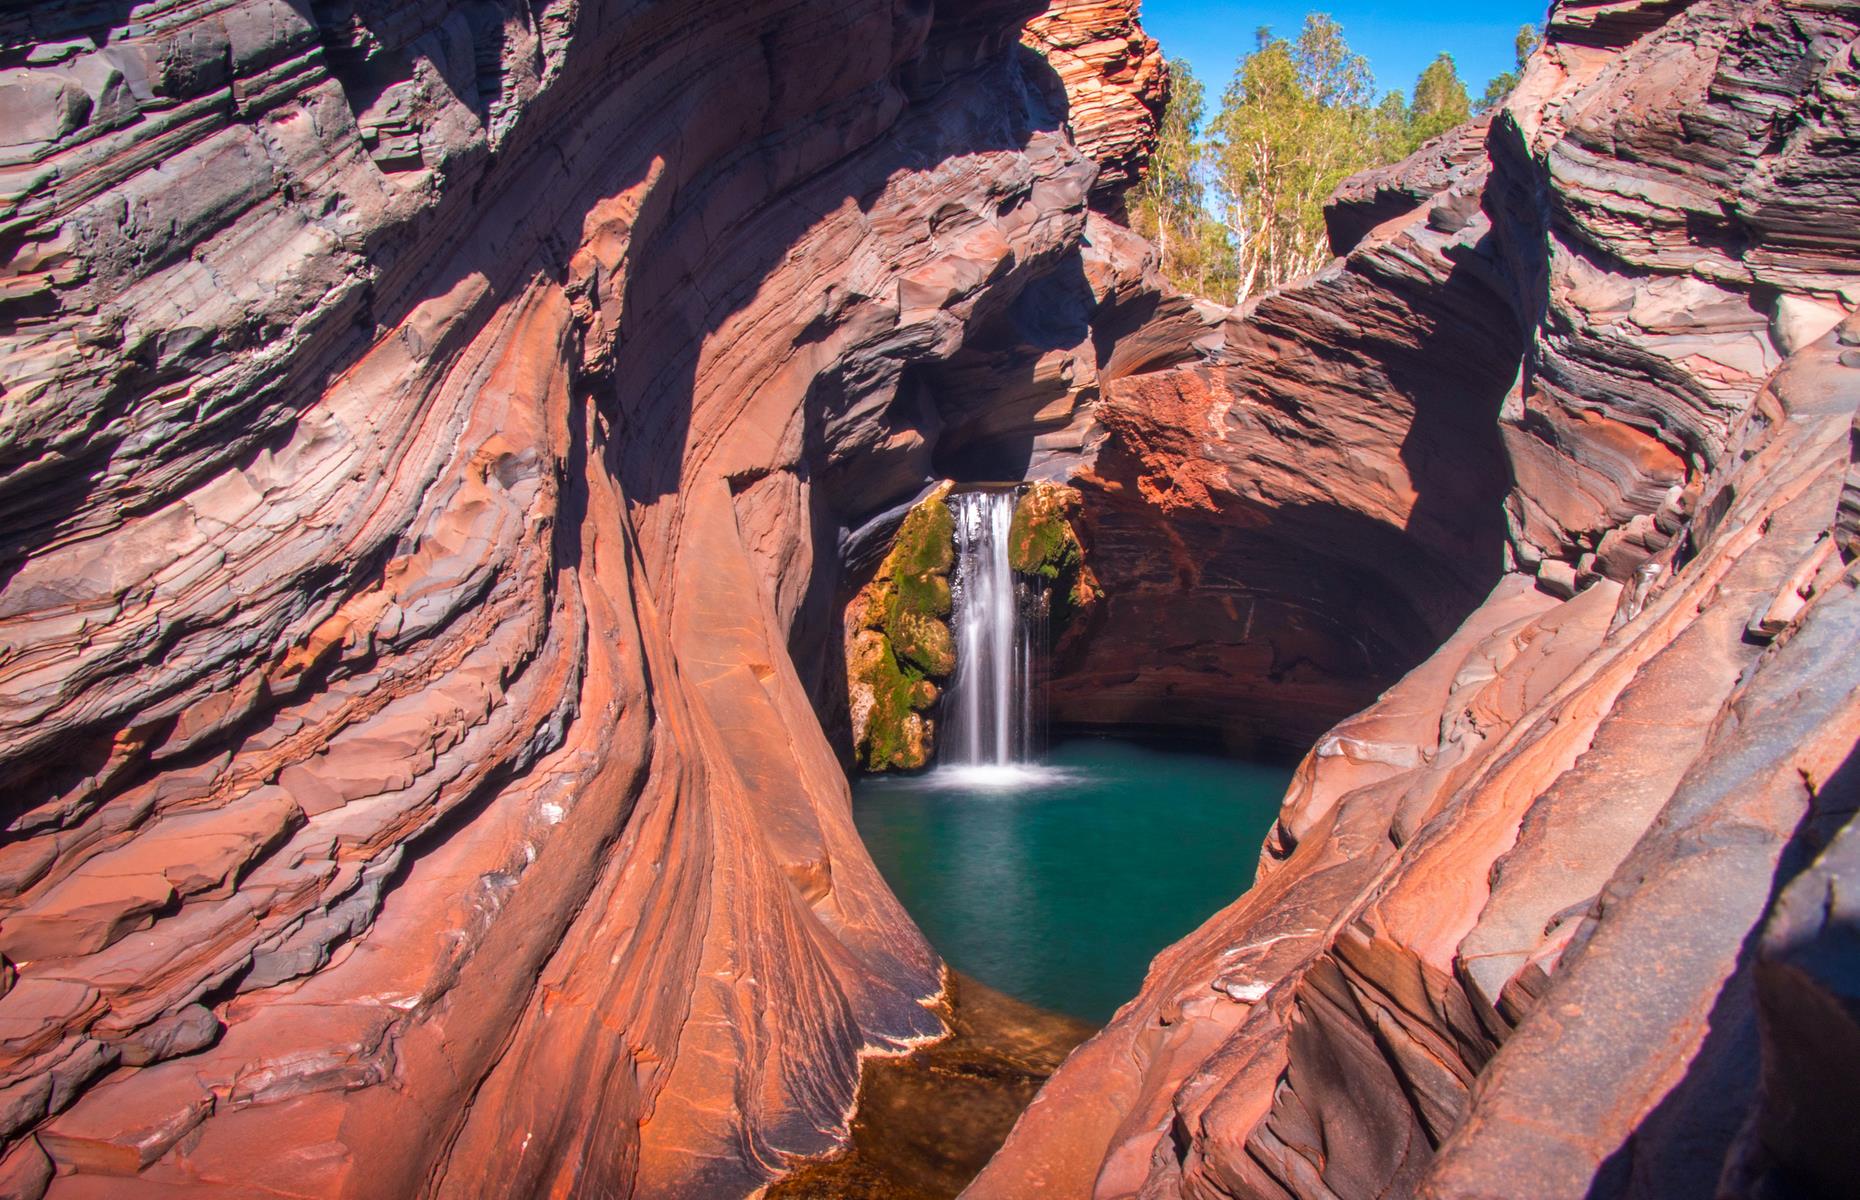 <p>Swim in spring-fed emerald pools beneath crashing waterfalls deep in the scorched depths of Western Australia’s Pilbara region. Site of some of the state's most striking scenery, Karijini National Park is known for its cavernous gorges and enticing creeks. It is home to a wide variety of birds and reptiles too, as well as red kangaroos, euros, rock-wallabies, echidnas and several bat species. Huge termite mounds also dot the landscape.</p>  <p><strong><a href="https://www.loveexploring.com/galleries/90665/24-of-australias-most-beautiful-outback-towns">Now check out Australia's most beautiful outback towns</a></strong></p>